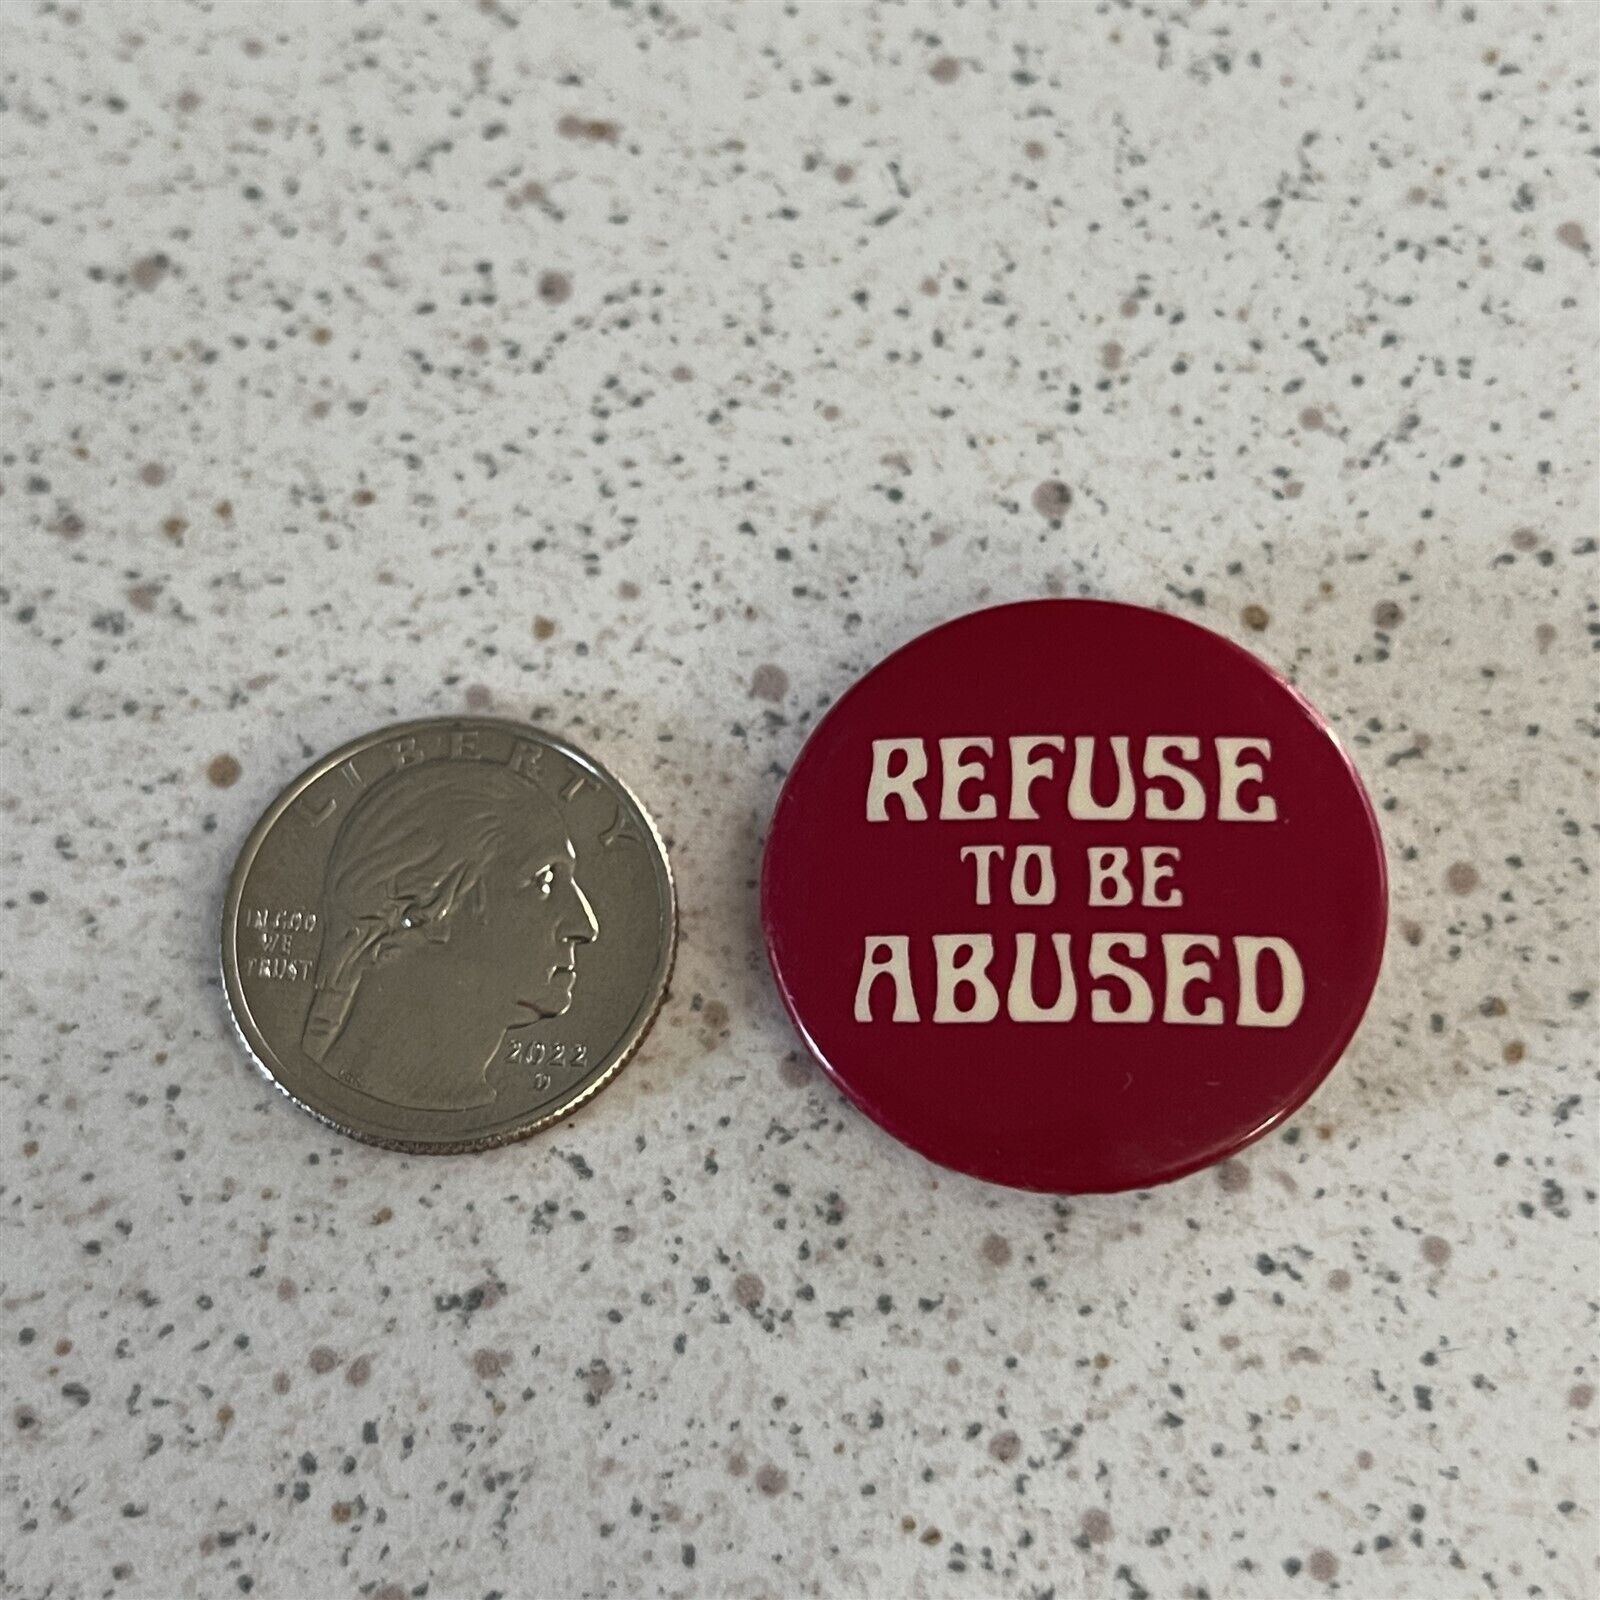 Refuse To Be Abused Anti Domestic Violence Pin Pinback Button #45066